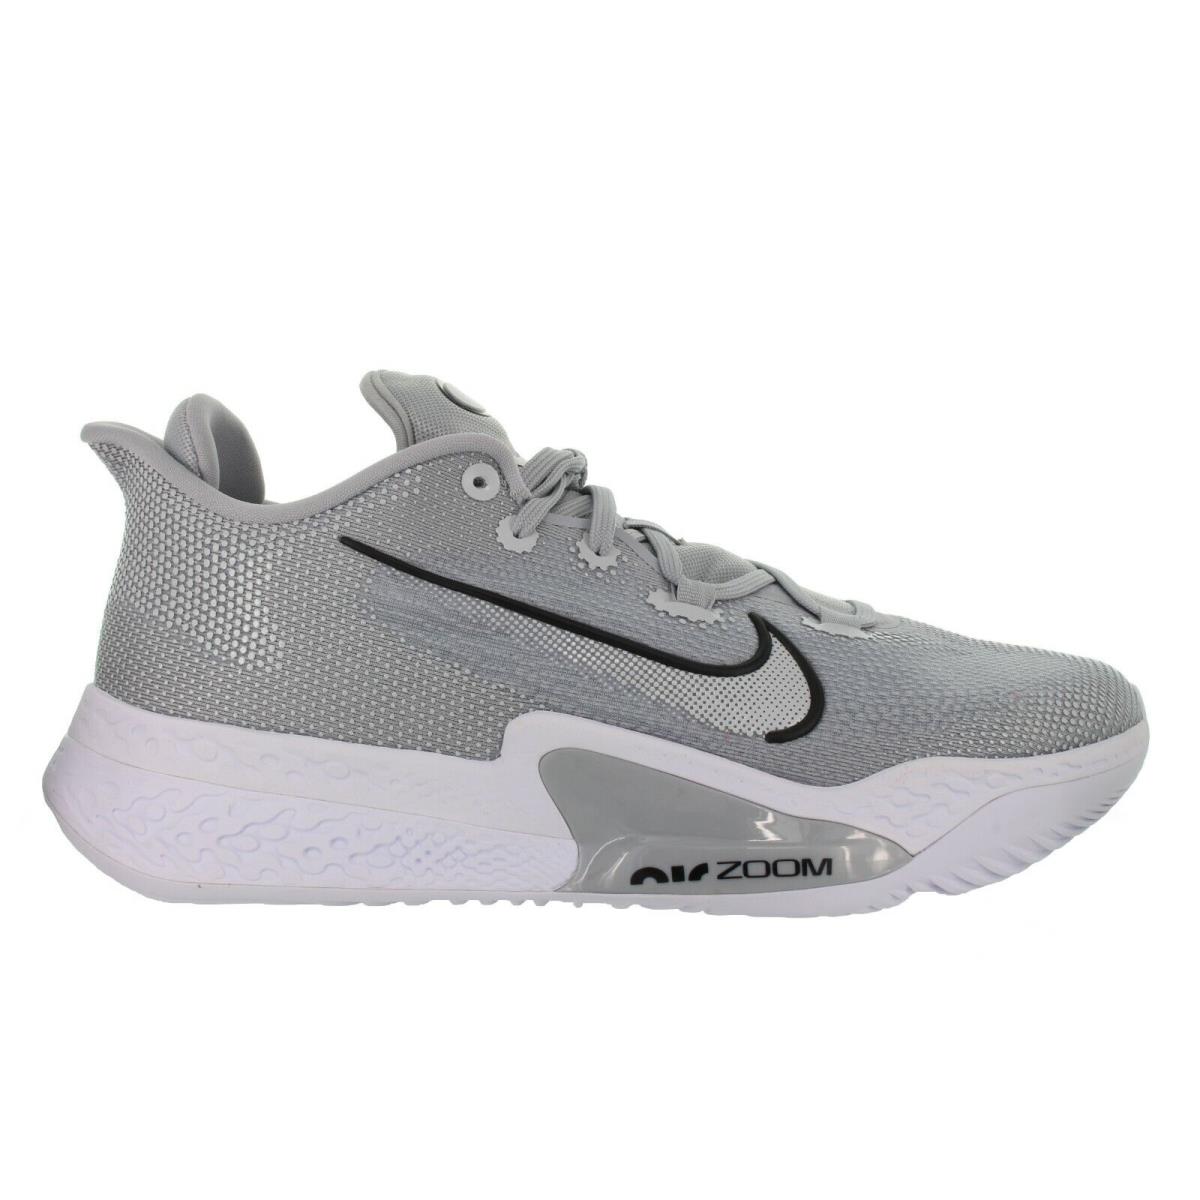 Nike Men`s Air Zoom BB Ntx TB Promo Wolf Grey Basketball Shoes Multiple Size